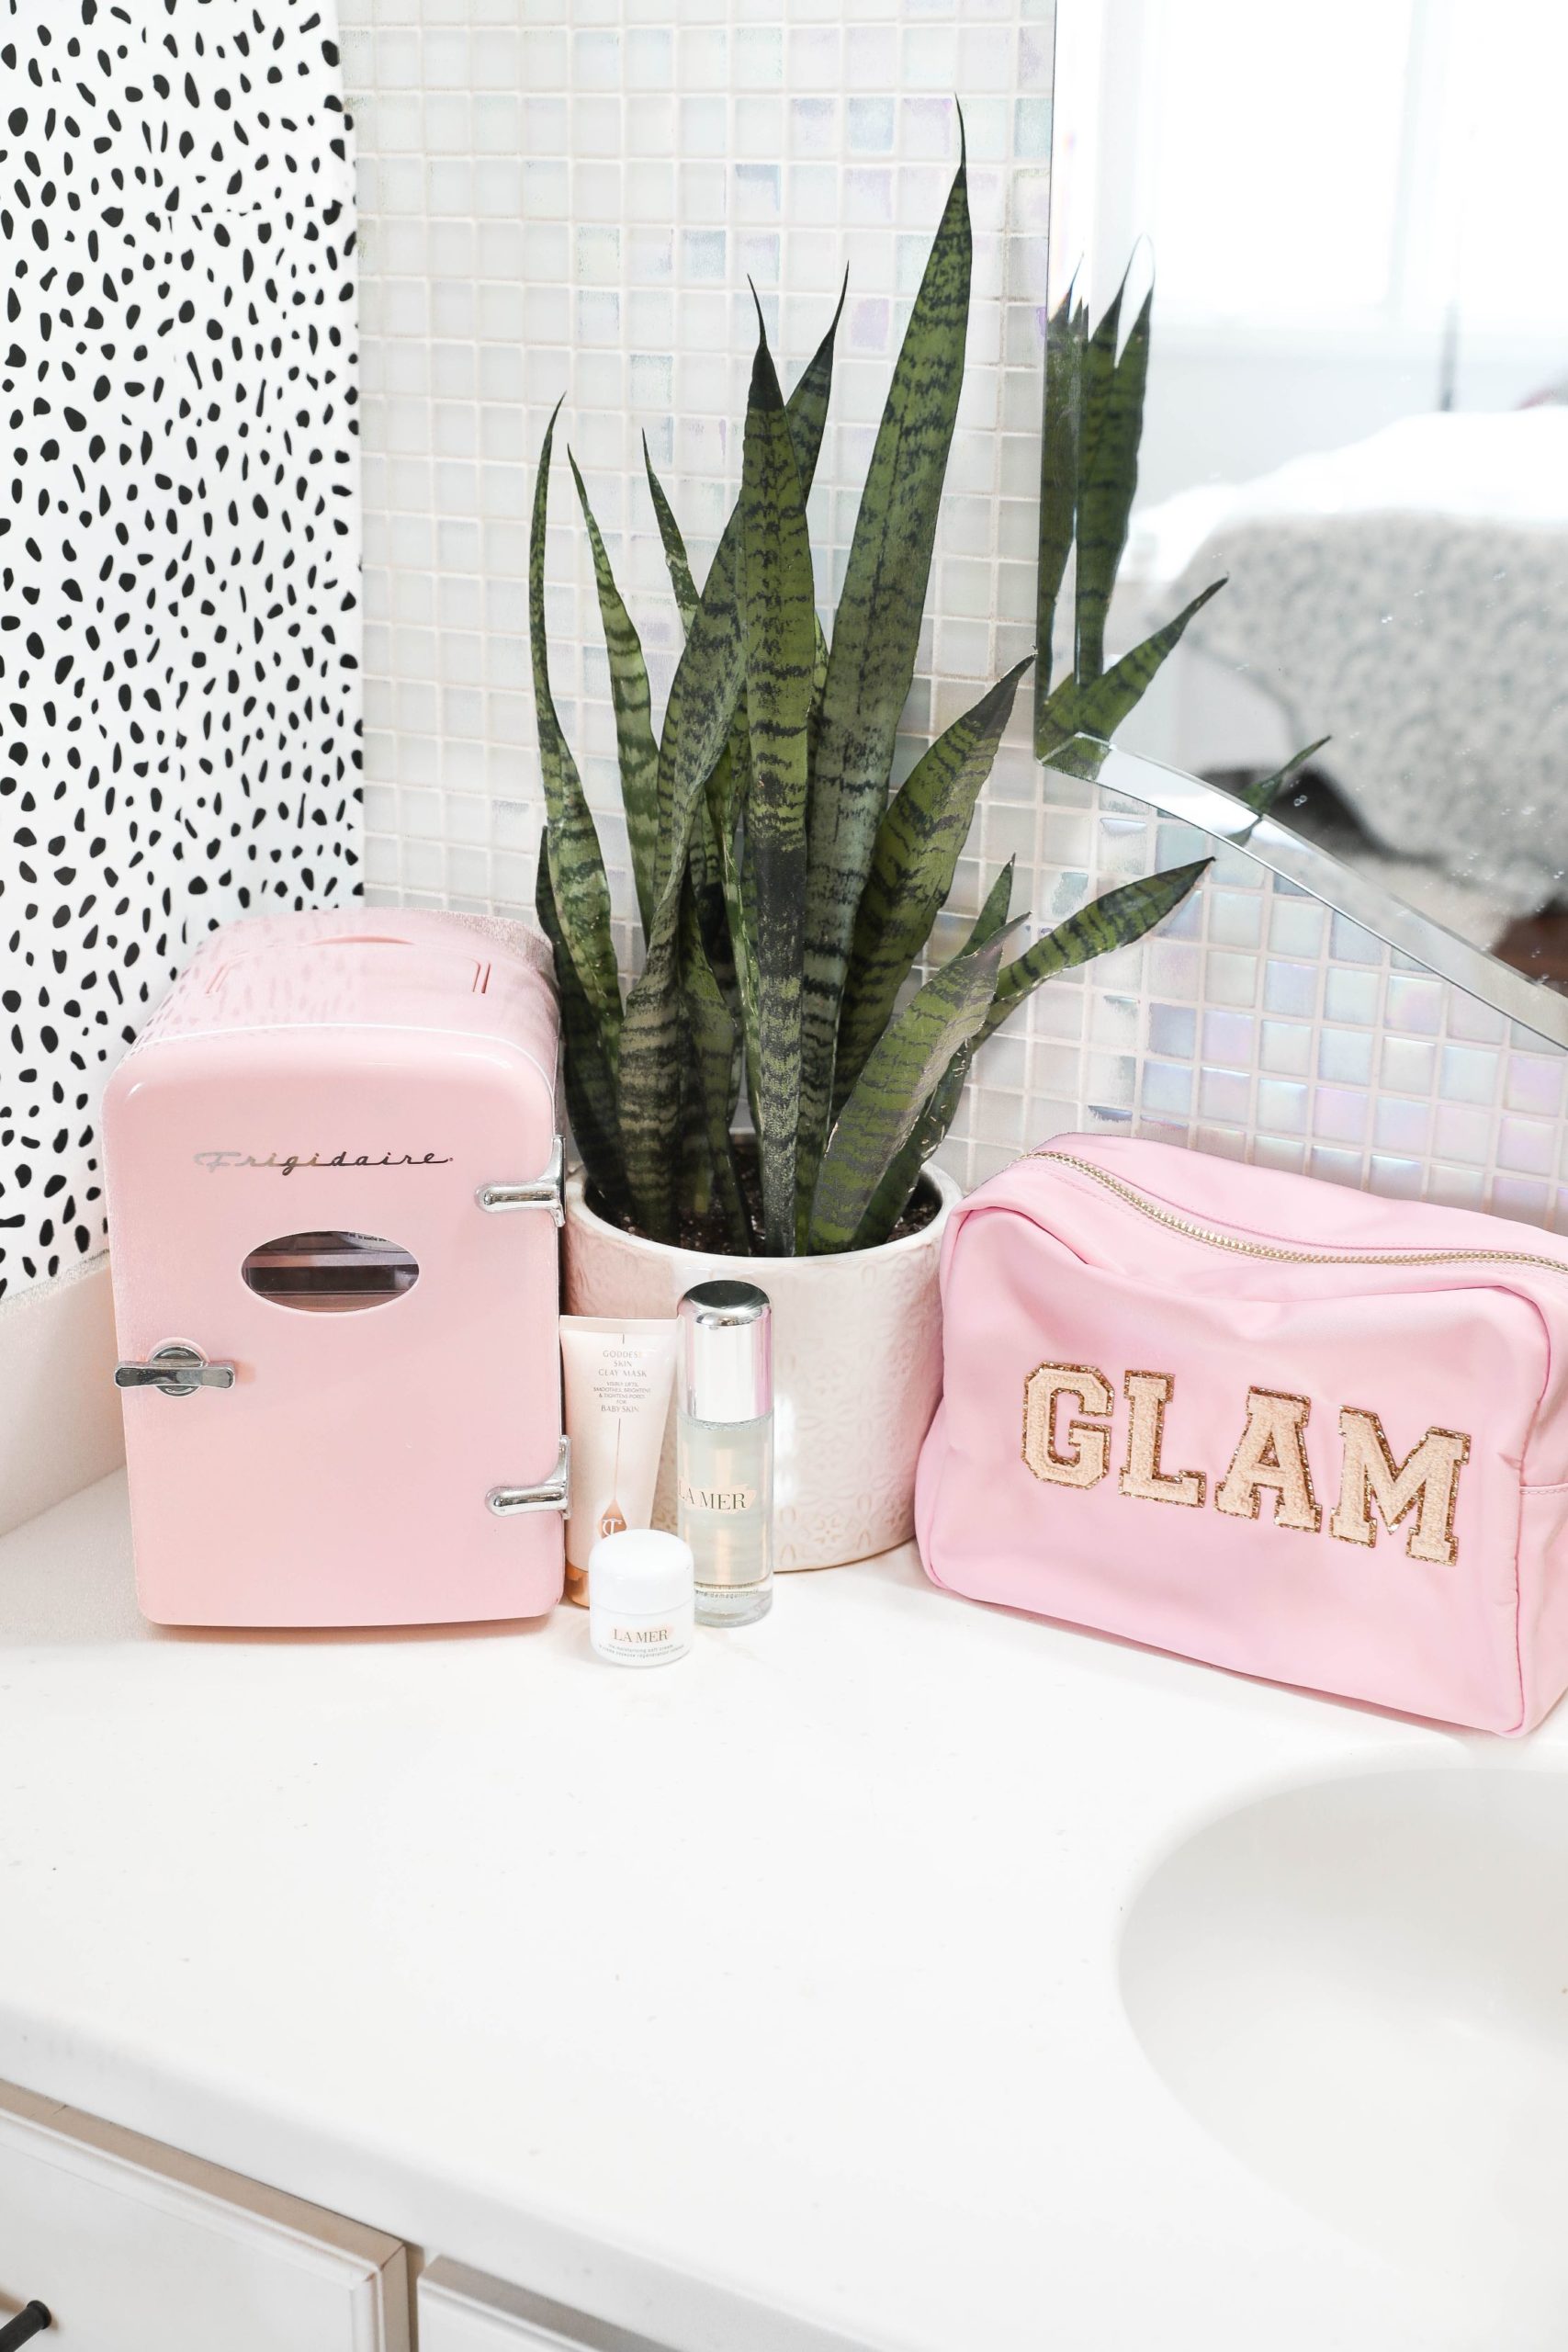 Lasted Spring Beauty Favorites! From hair, to makeup, to face masks, accessories, and nails. I am also sharing what is in my beauty fridge! Daily Dose of Charm by Lauren Lindmark